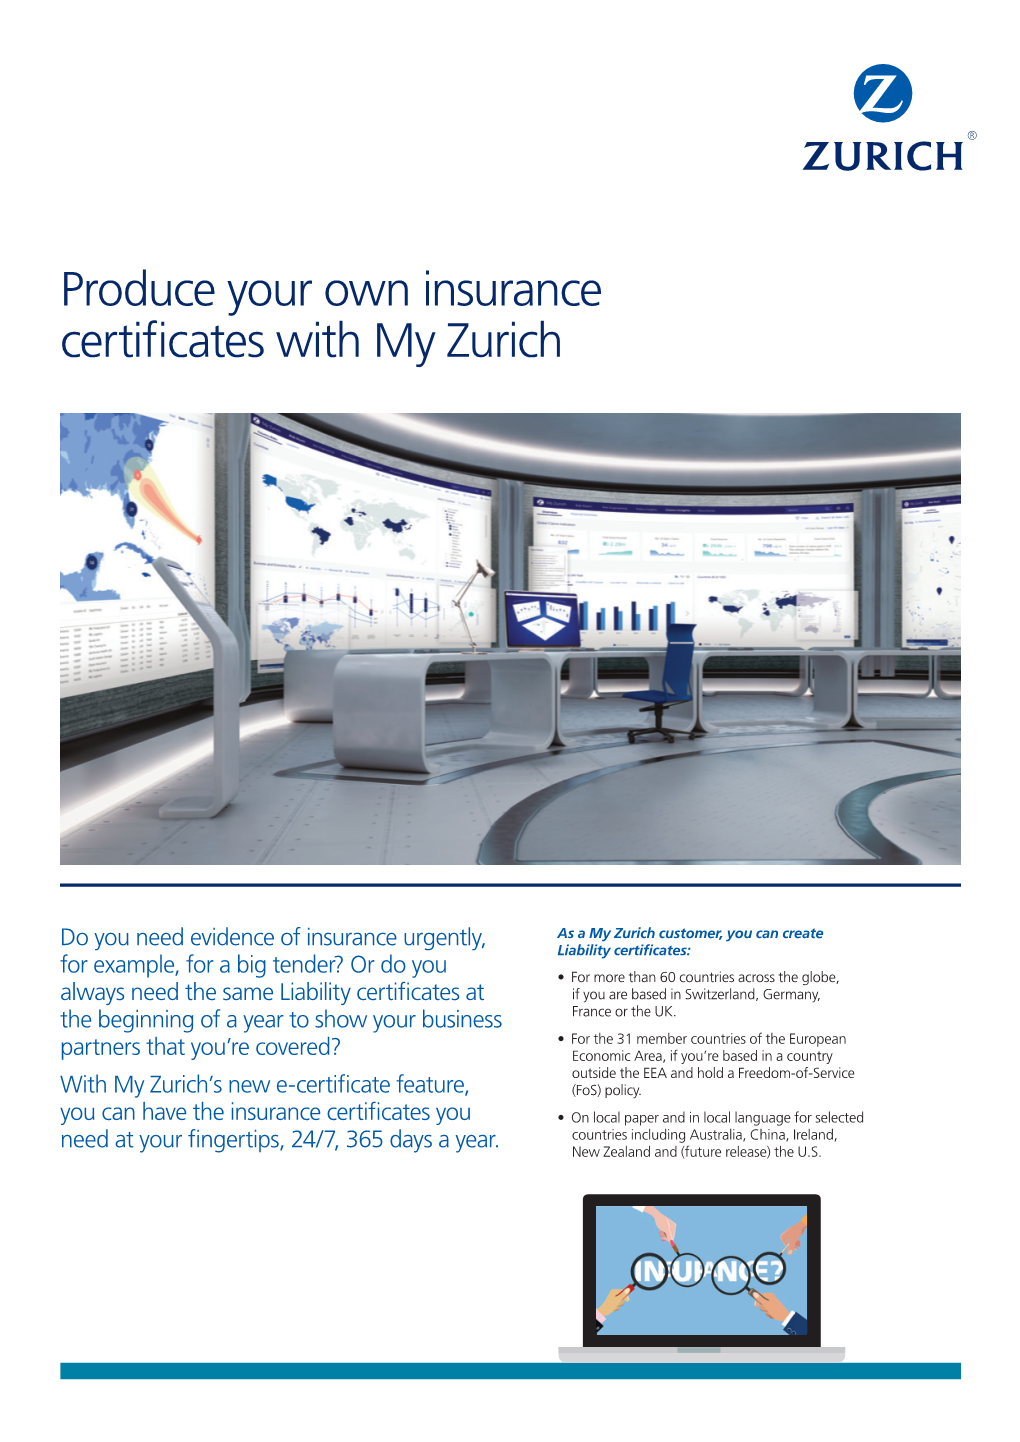 Produce Your Own Insurance Certificates with My Zurich